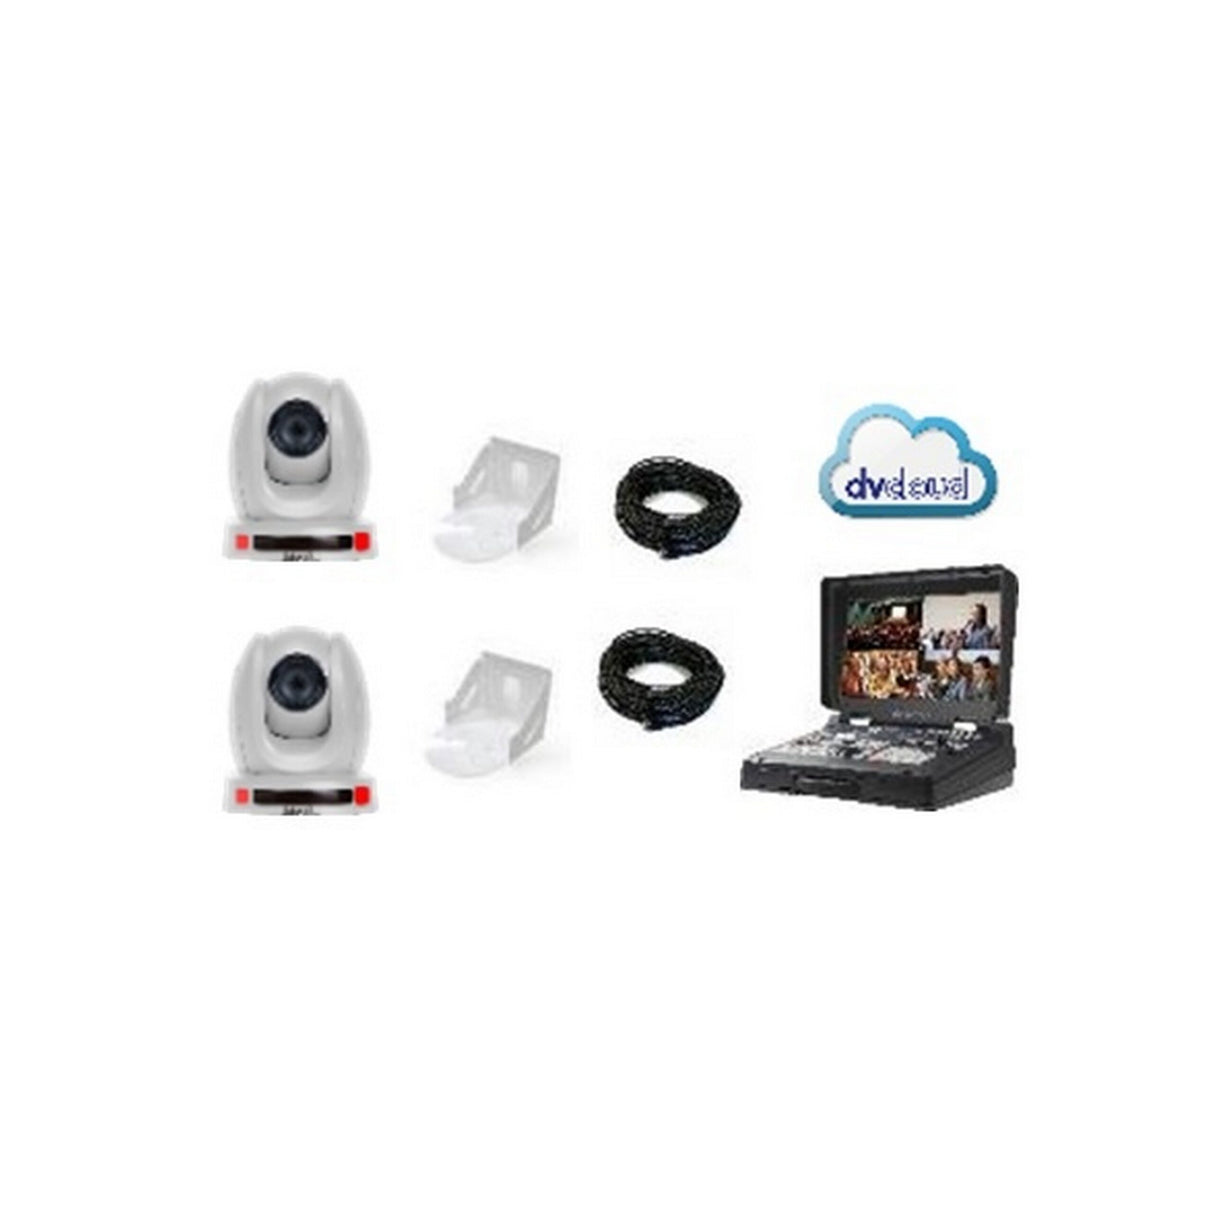 Datavideo CAM-CLOUD SRT PACKAGE CW PTC-140TW Camera Streaming Kit with 12 Month dvCloud Essentials Subscription